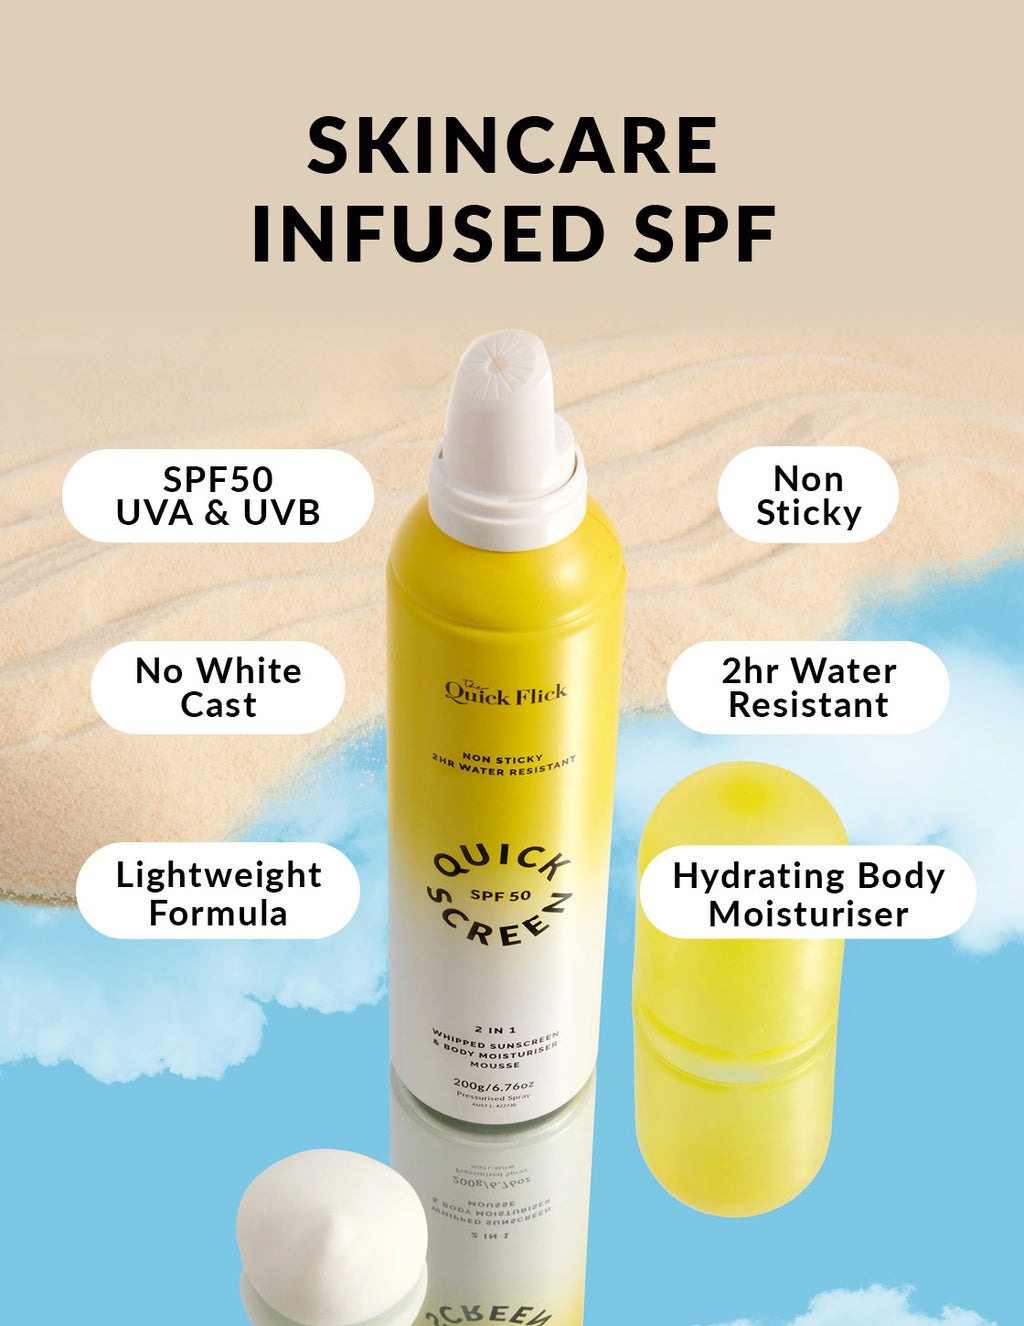 Quick Screen Whipped Mousse SPF 50+ 200g